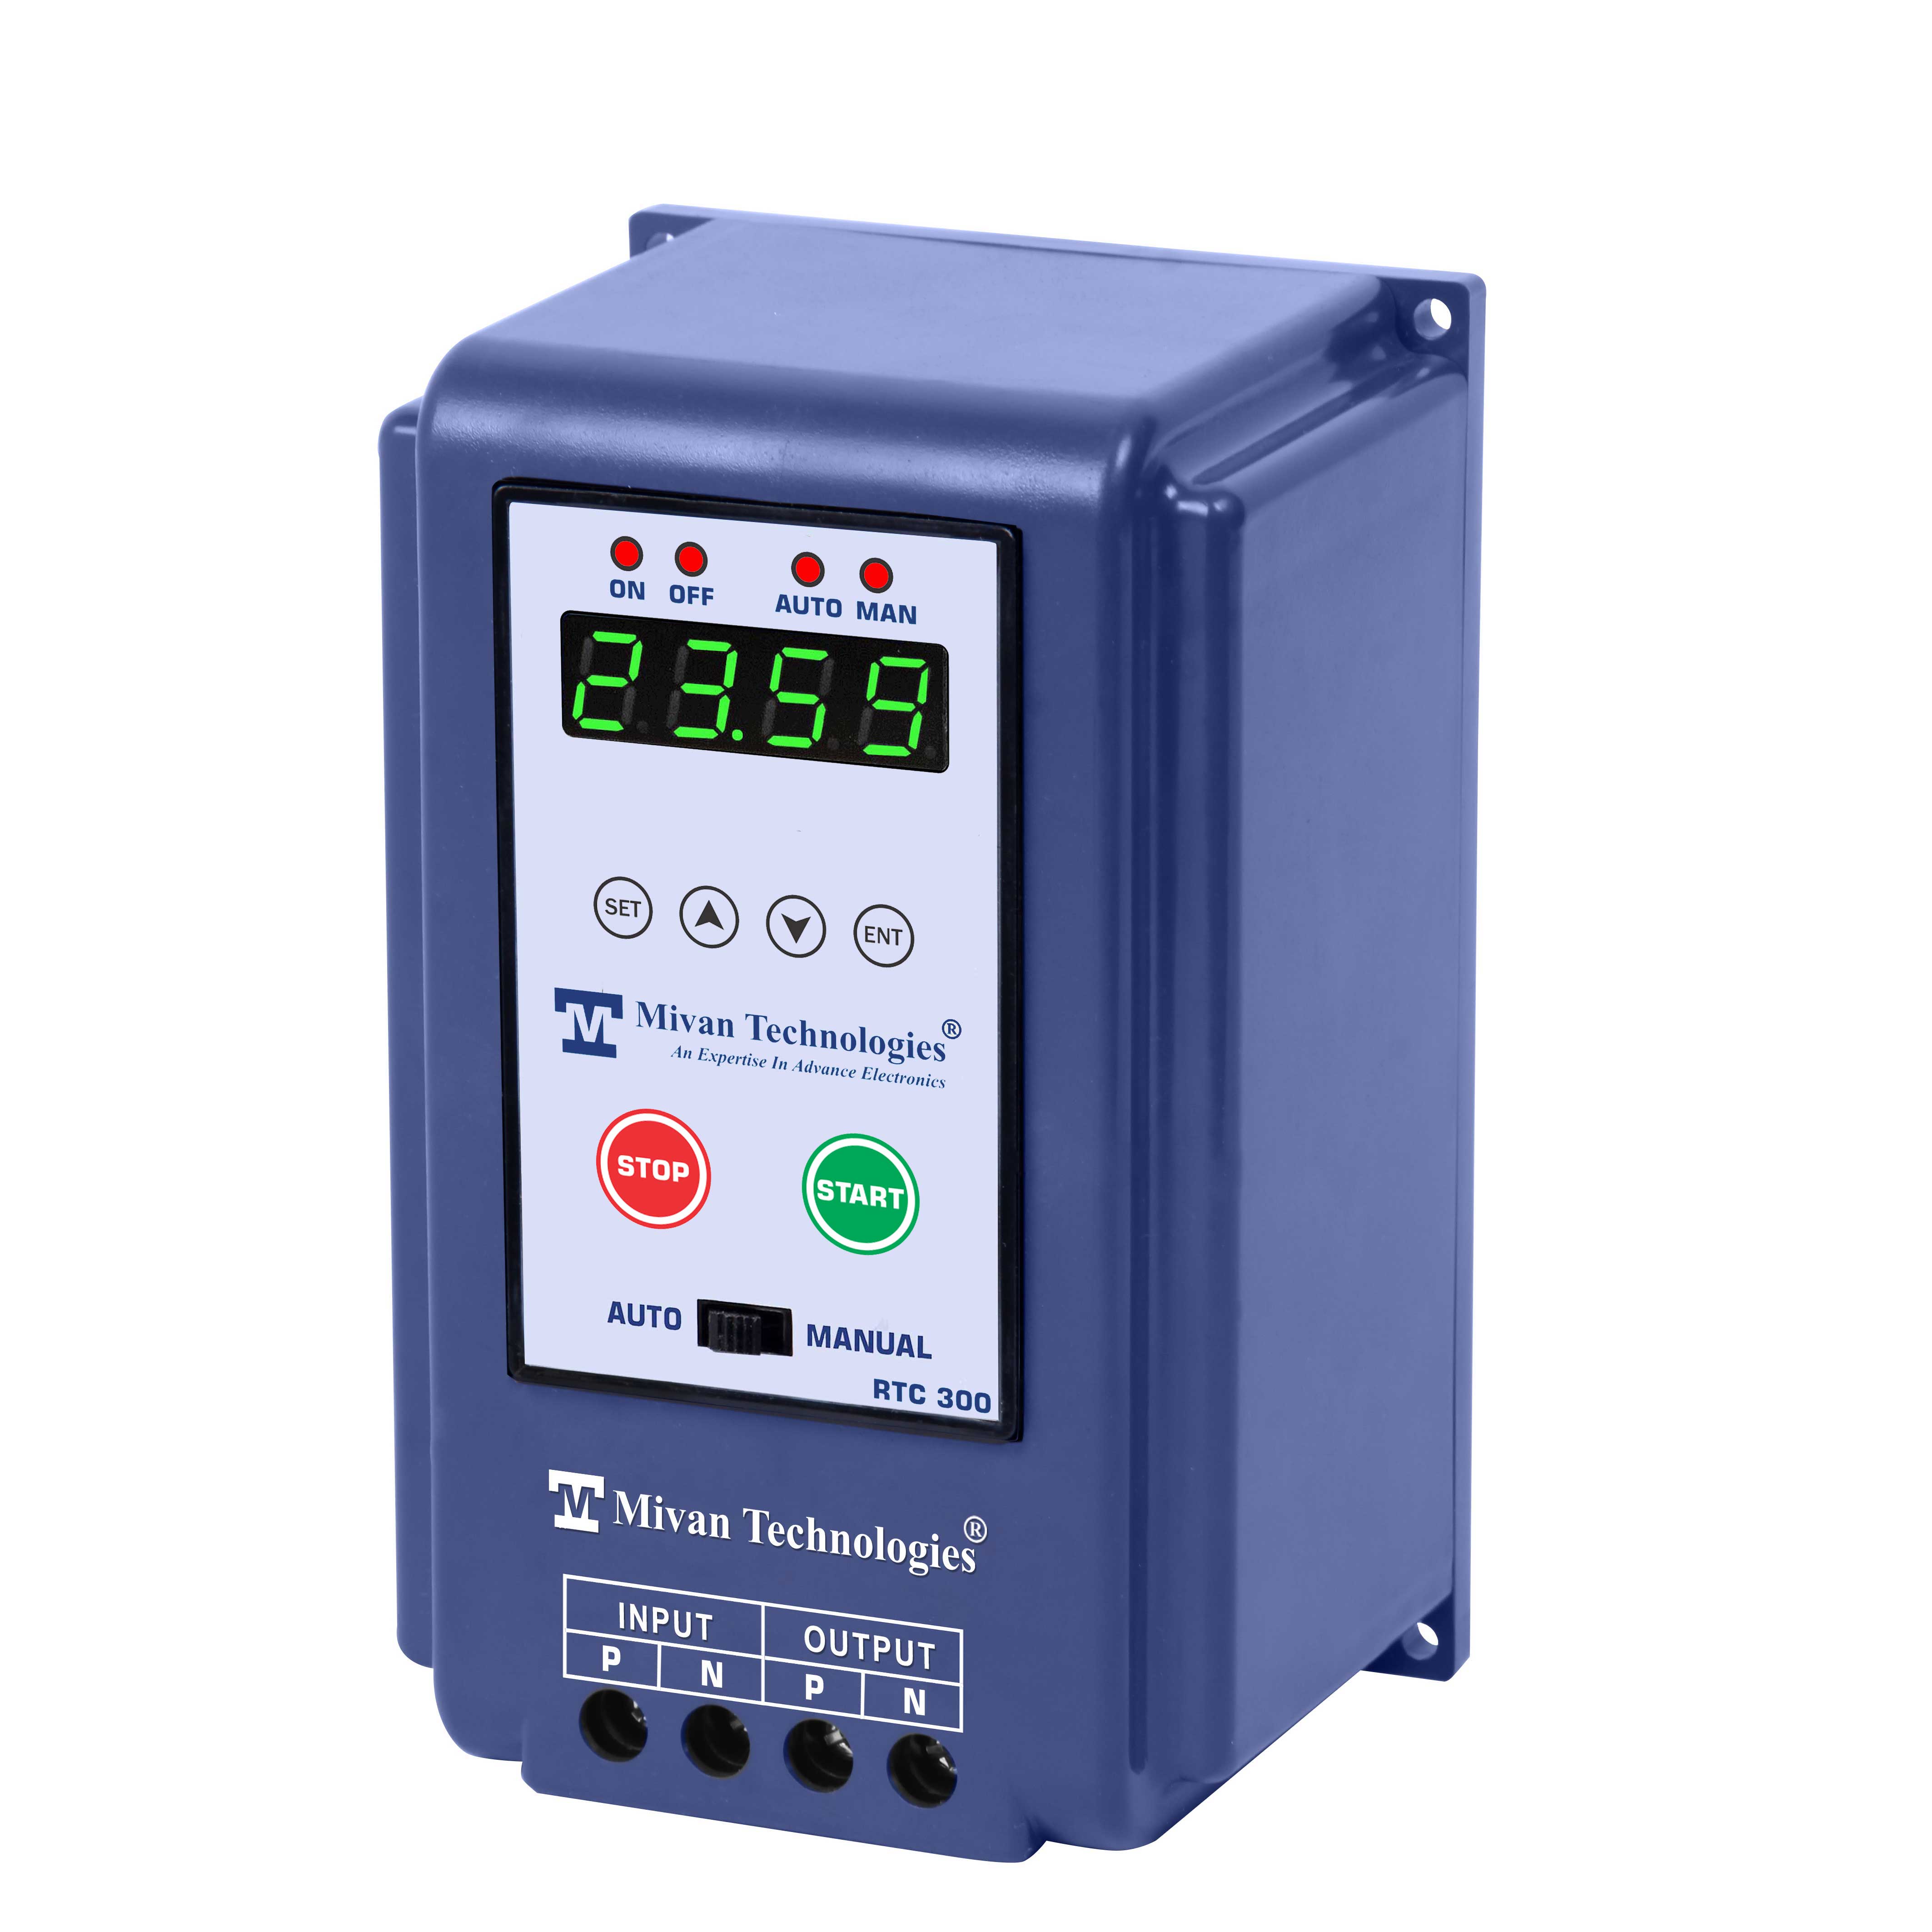 RTC 300 HD Digital Time switch with 16 on off time with weekly off facility for single phase